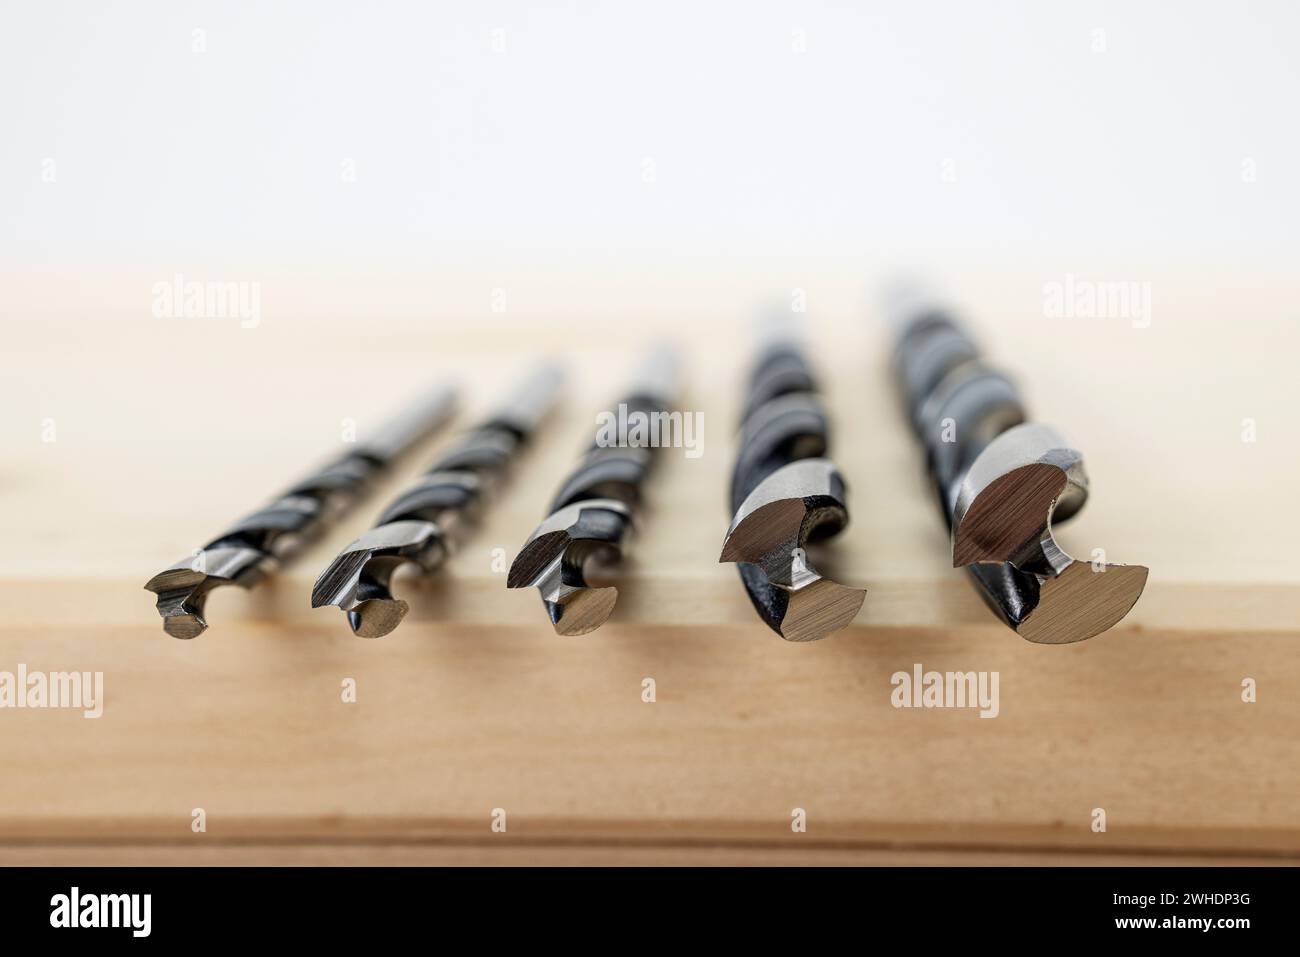 Woodworking, five wood twist drills 4, 5, 6, 8 and 10 mm, lying on glued wood panel, blurring, Stock Photo